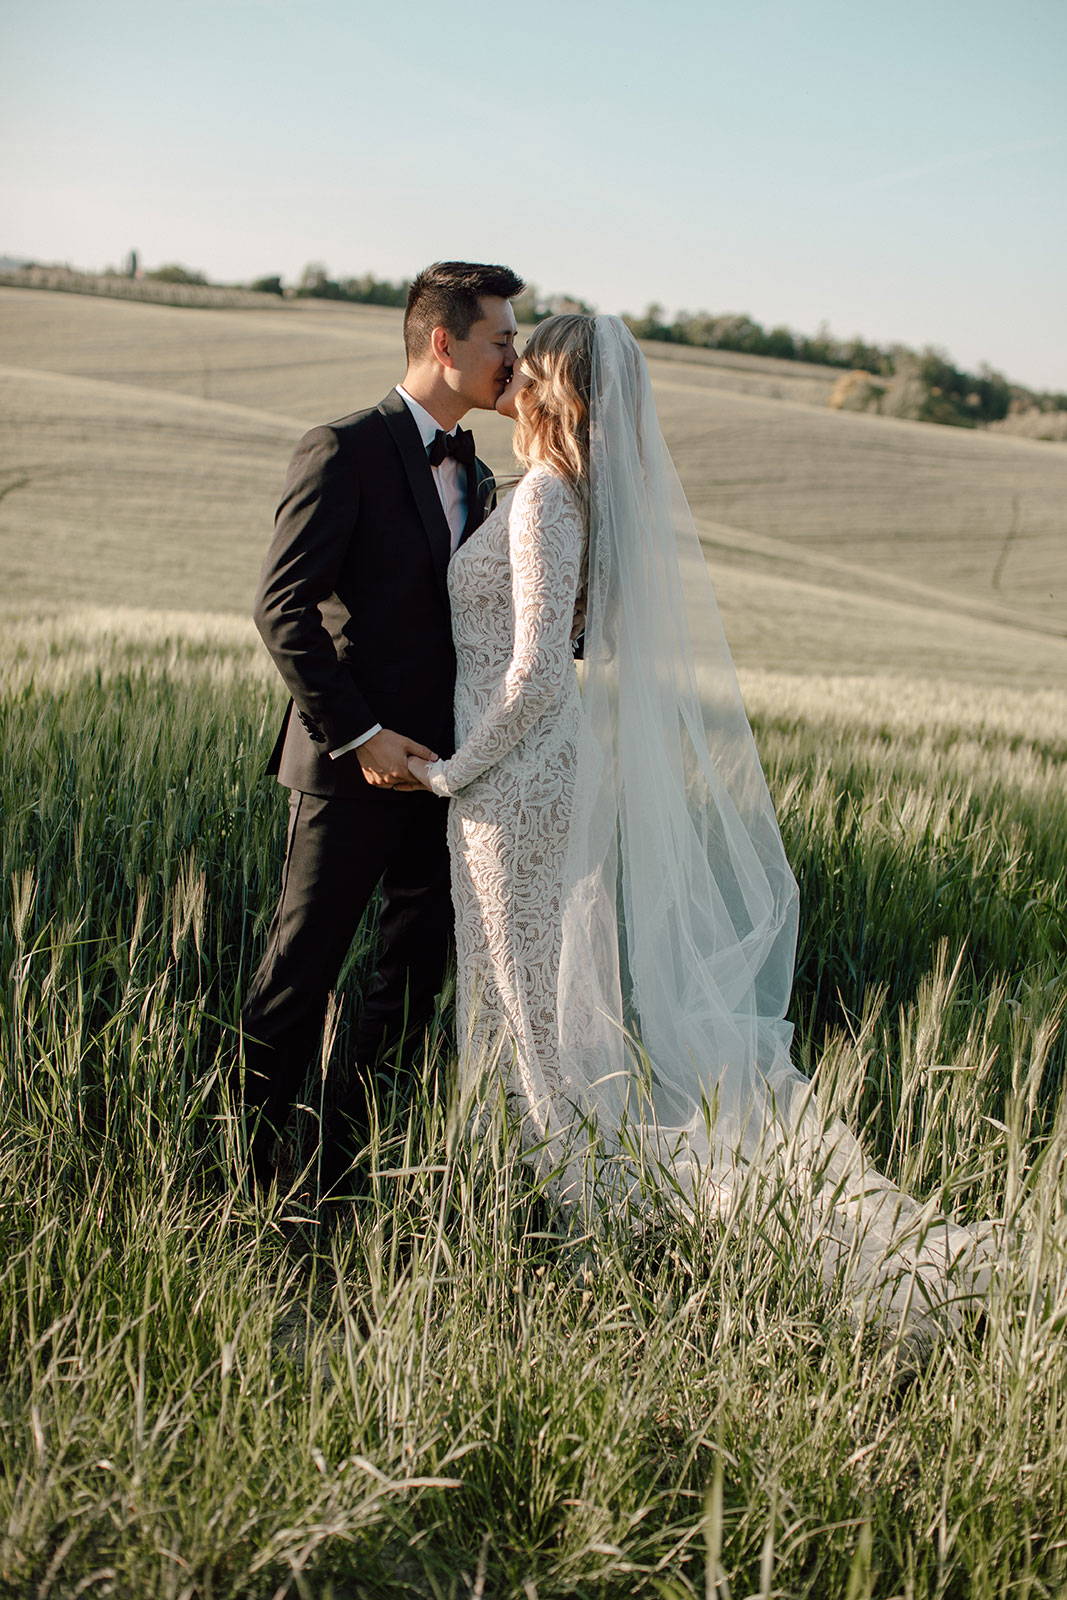 Bride and Groom with Italian Countryside in the background